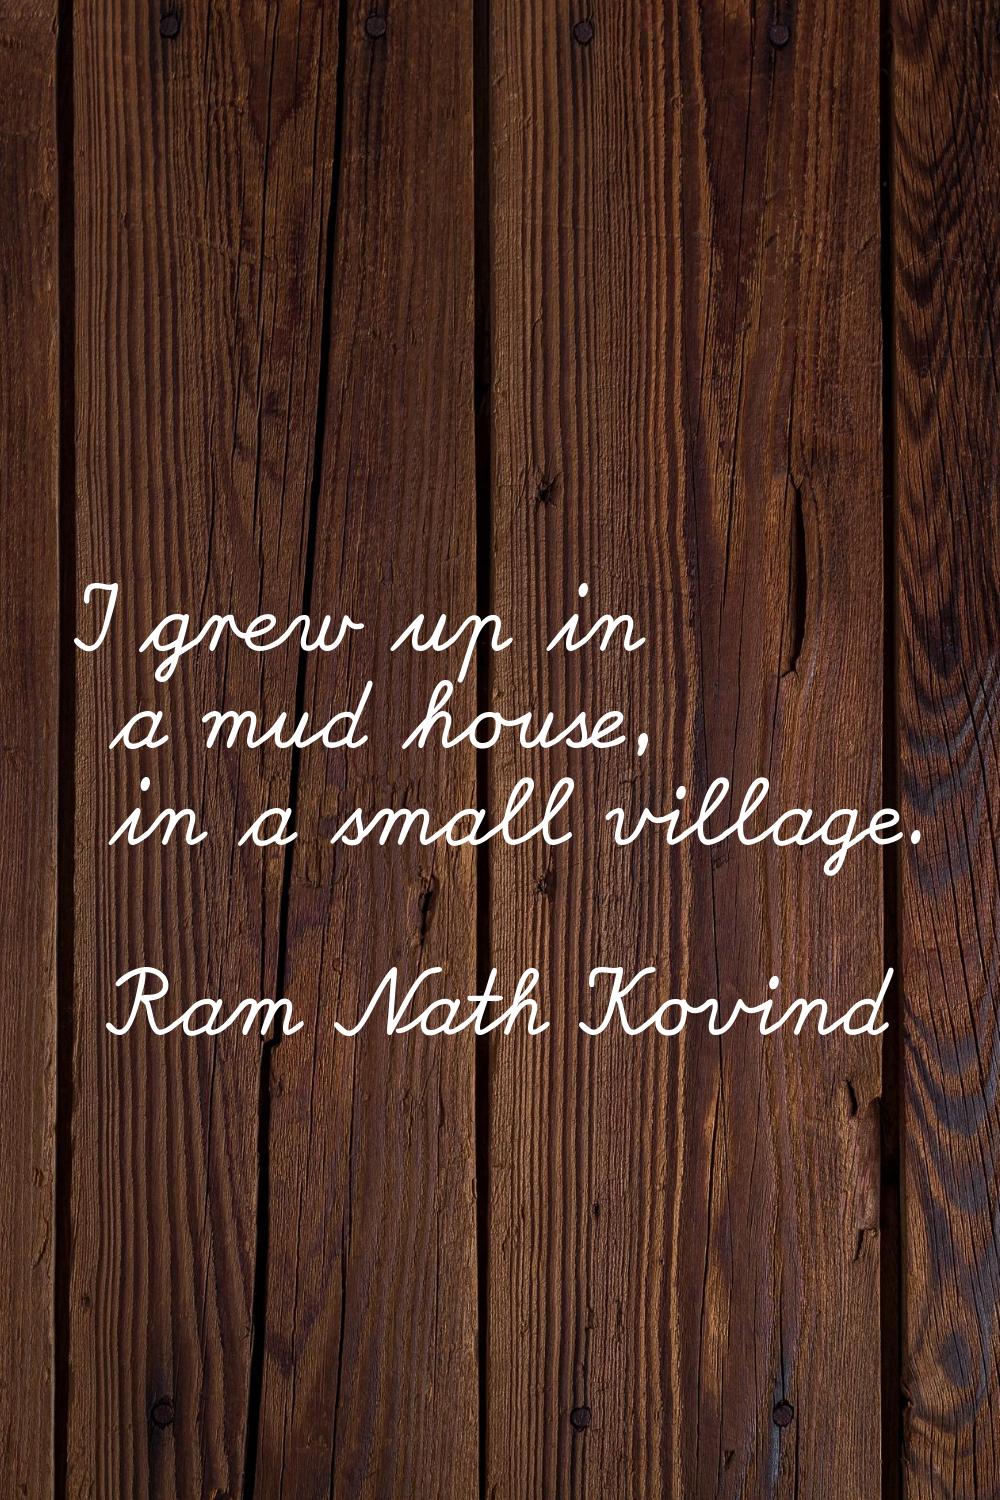 I grew up in a mud house, in a small village.